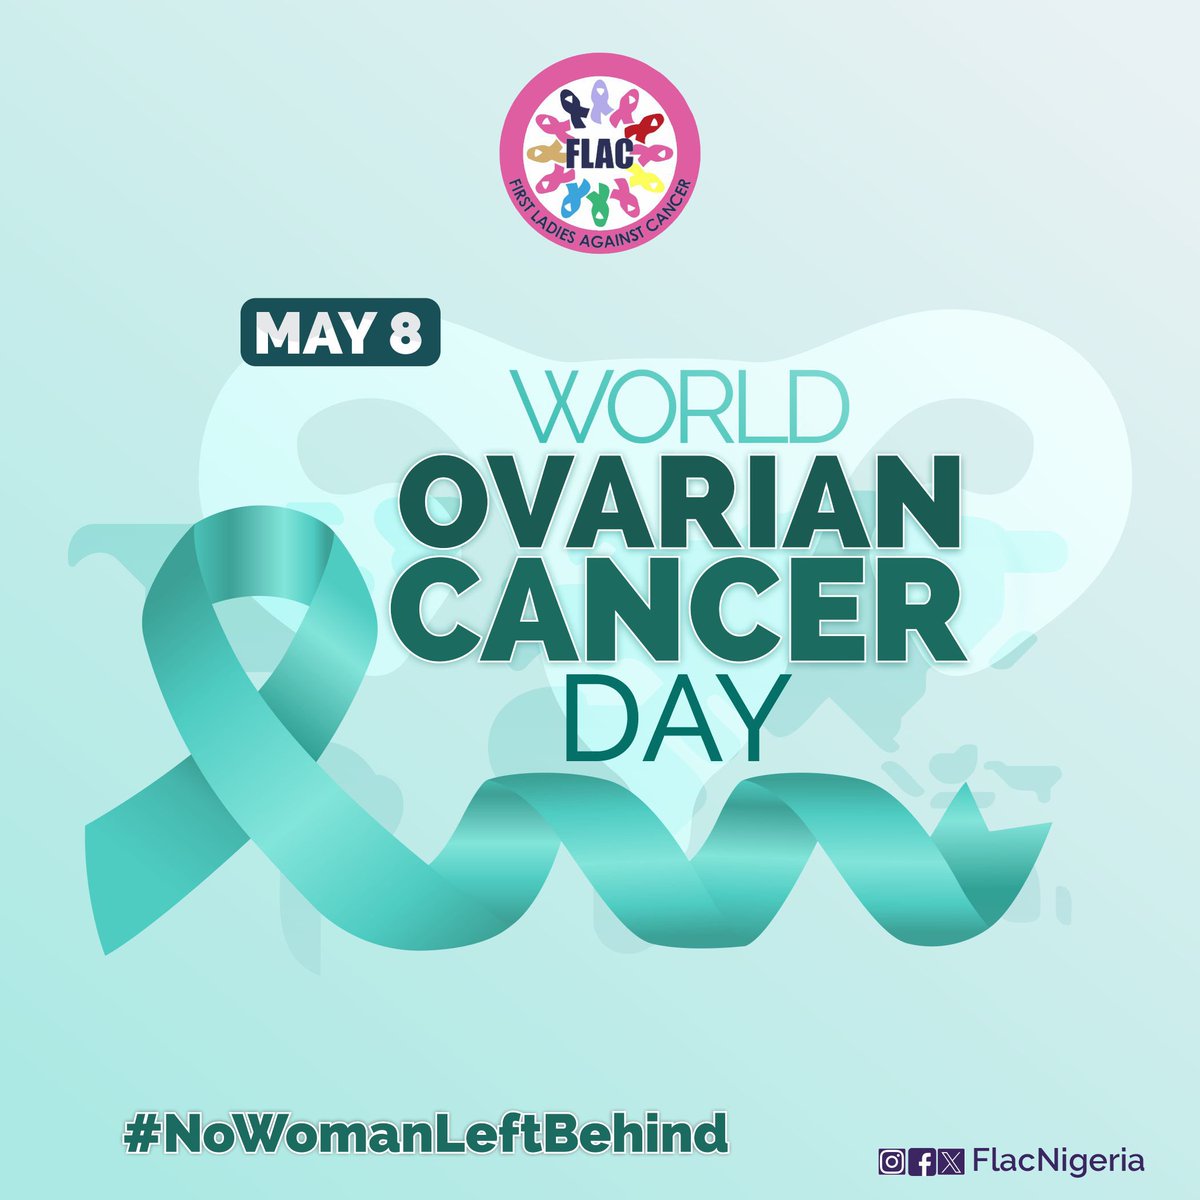 On #WorldOvarianCancerDay, let’s stand together to raise awareness about ovarian cancer and advocate for early detection and treatment. Get Screened✅ Get Treated✅ #NoWomanLeftBehind #OvarianCancerDay